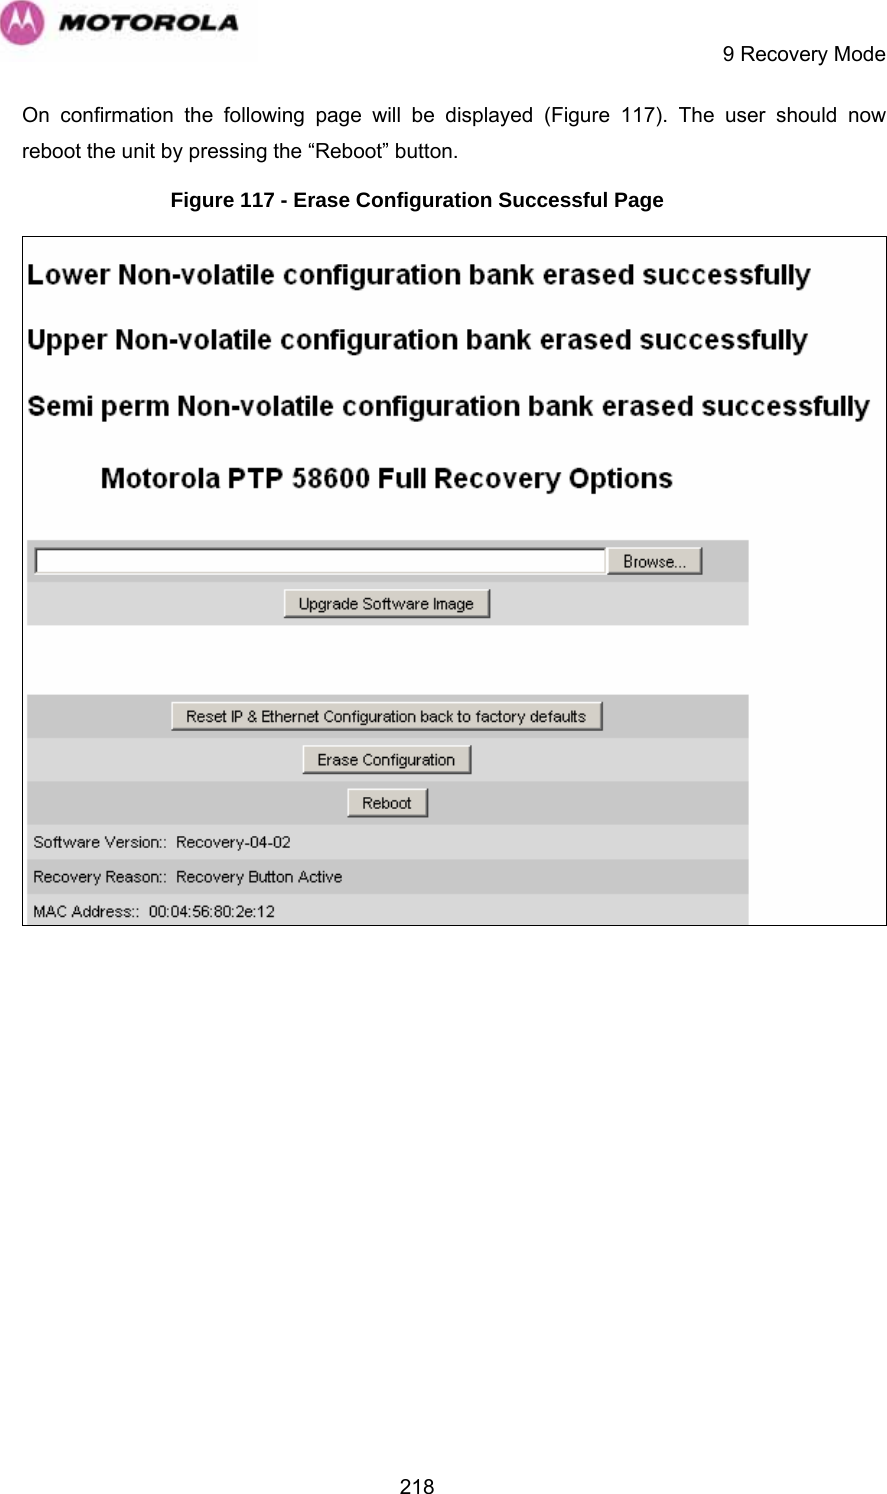     9 Recovery Mode  218On confirmation the following page will be displayed (Figure 117). The user should now reboot the unit by pressing the “Reboot” button. Figure 117 - Erase Configuration Successful Page   